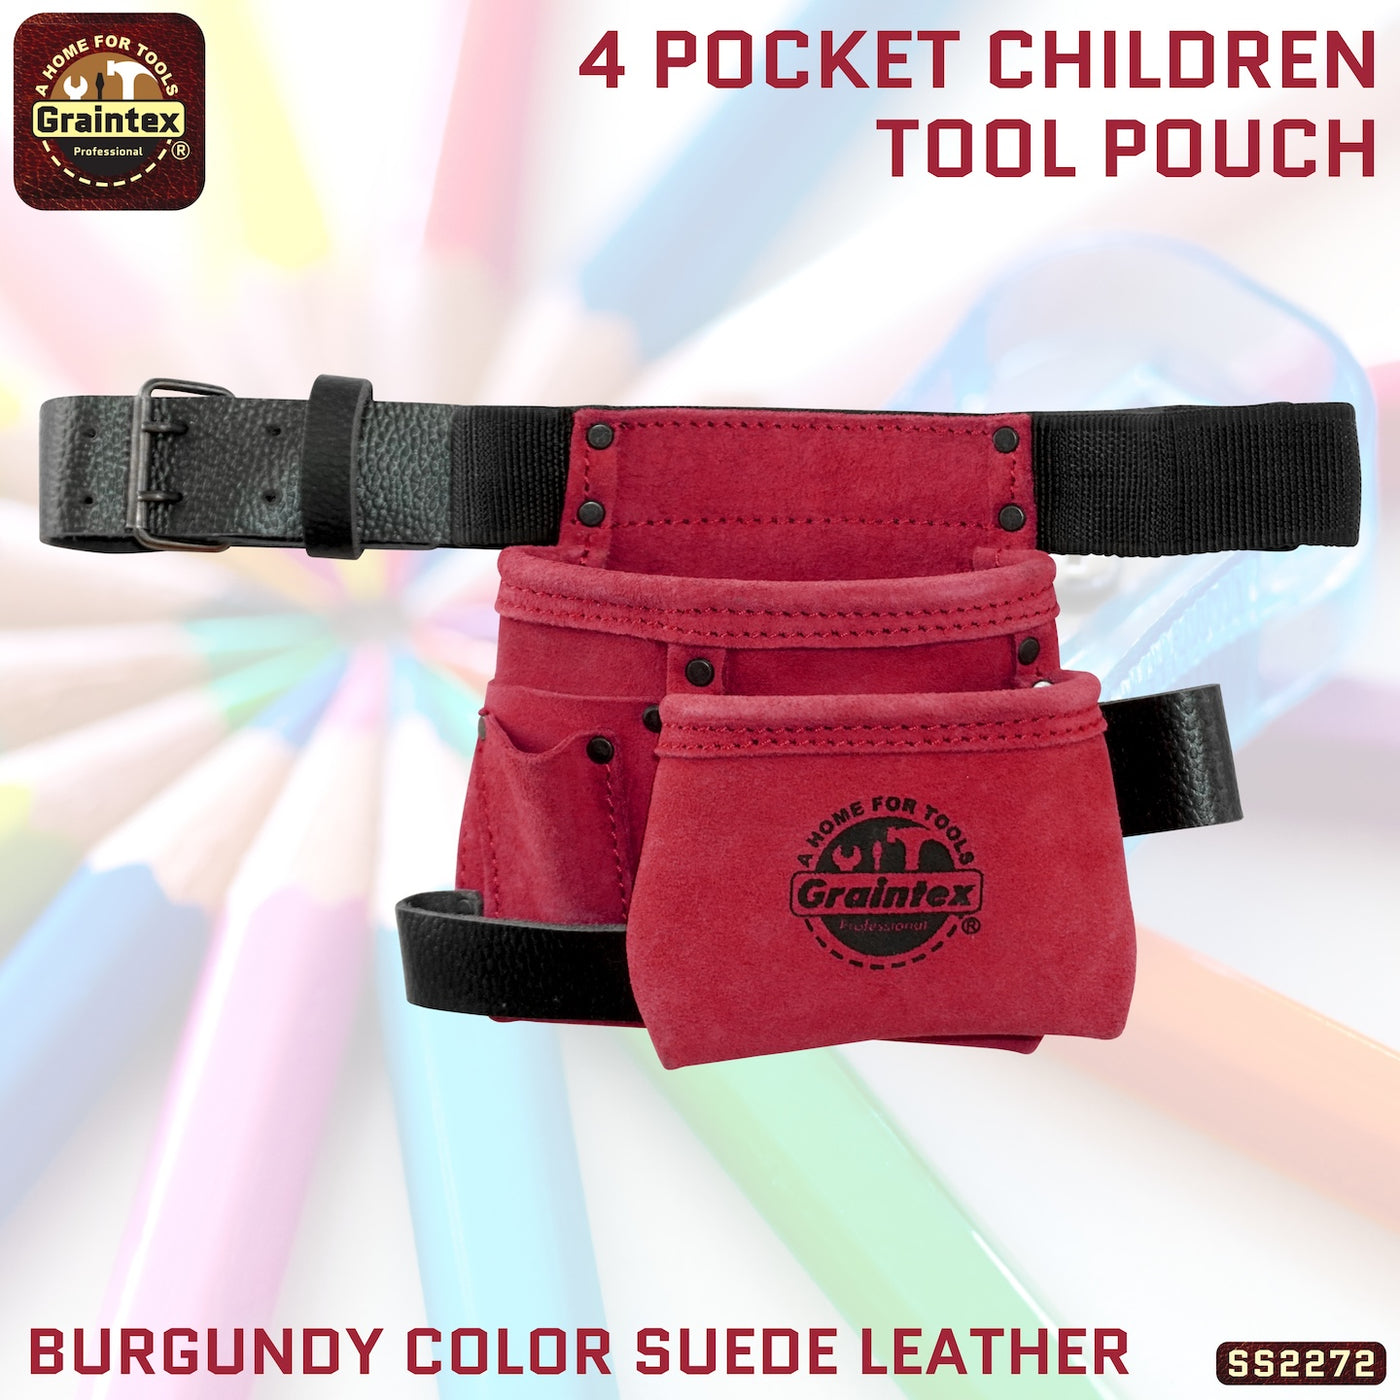 SS2272 :: 4 Pocket Children Tool Pouch Burgundy Color Suede Leather